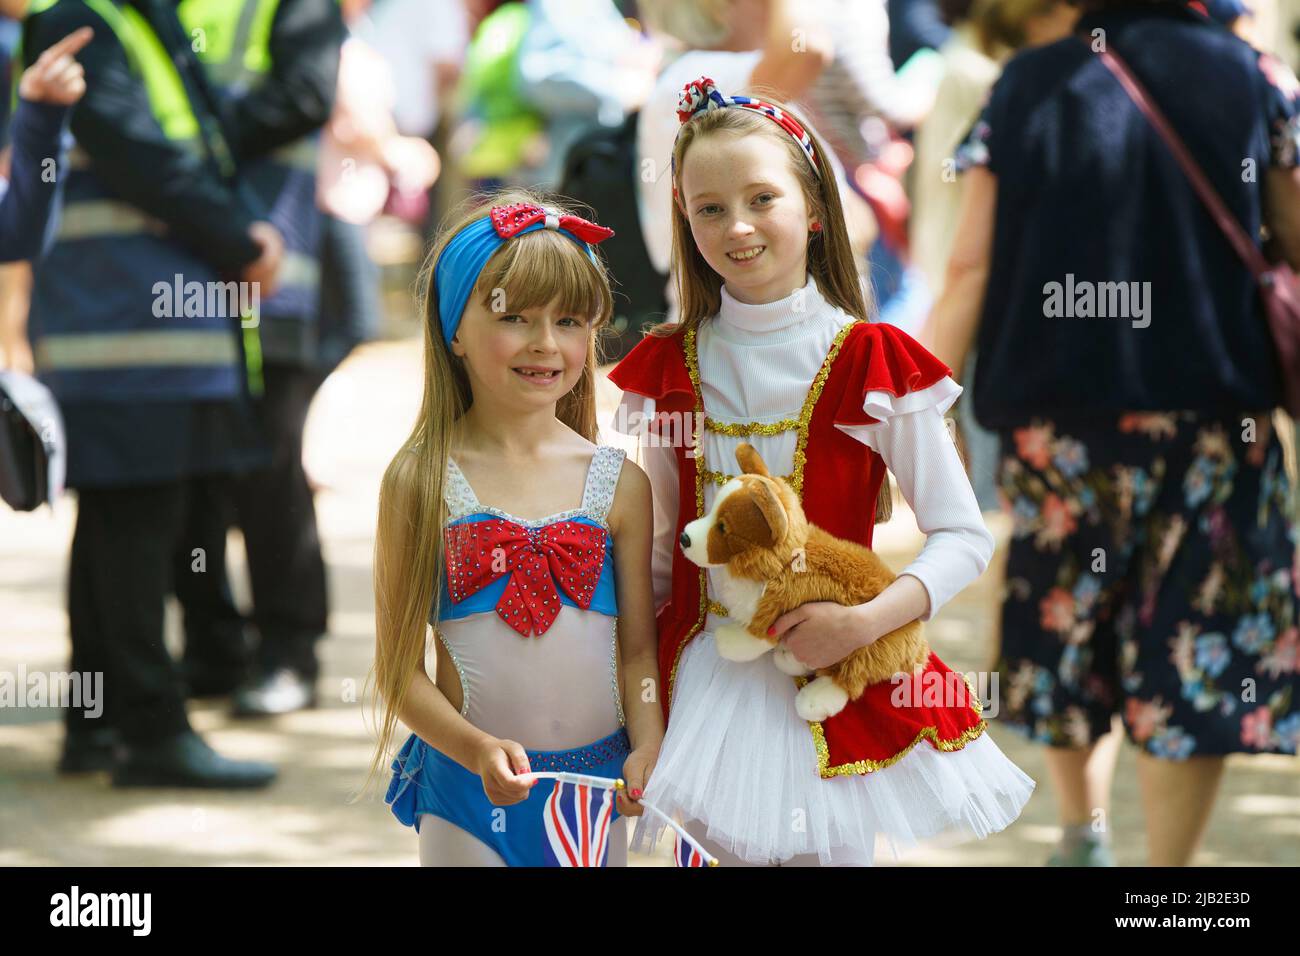 LONDON - JUNE 2: Two young girls in costume, watch the Trooping the Colour ceremony on June 2, 2022 in central London. Credit: David Levenson/Alamy Live News Stock Photo